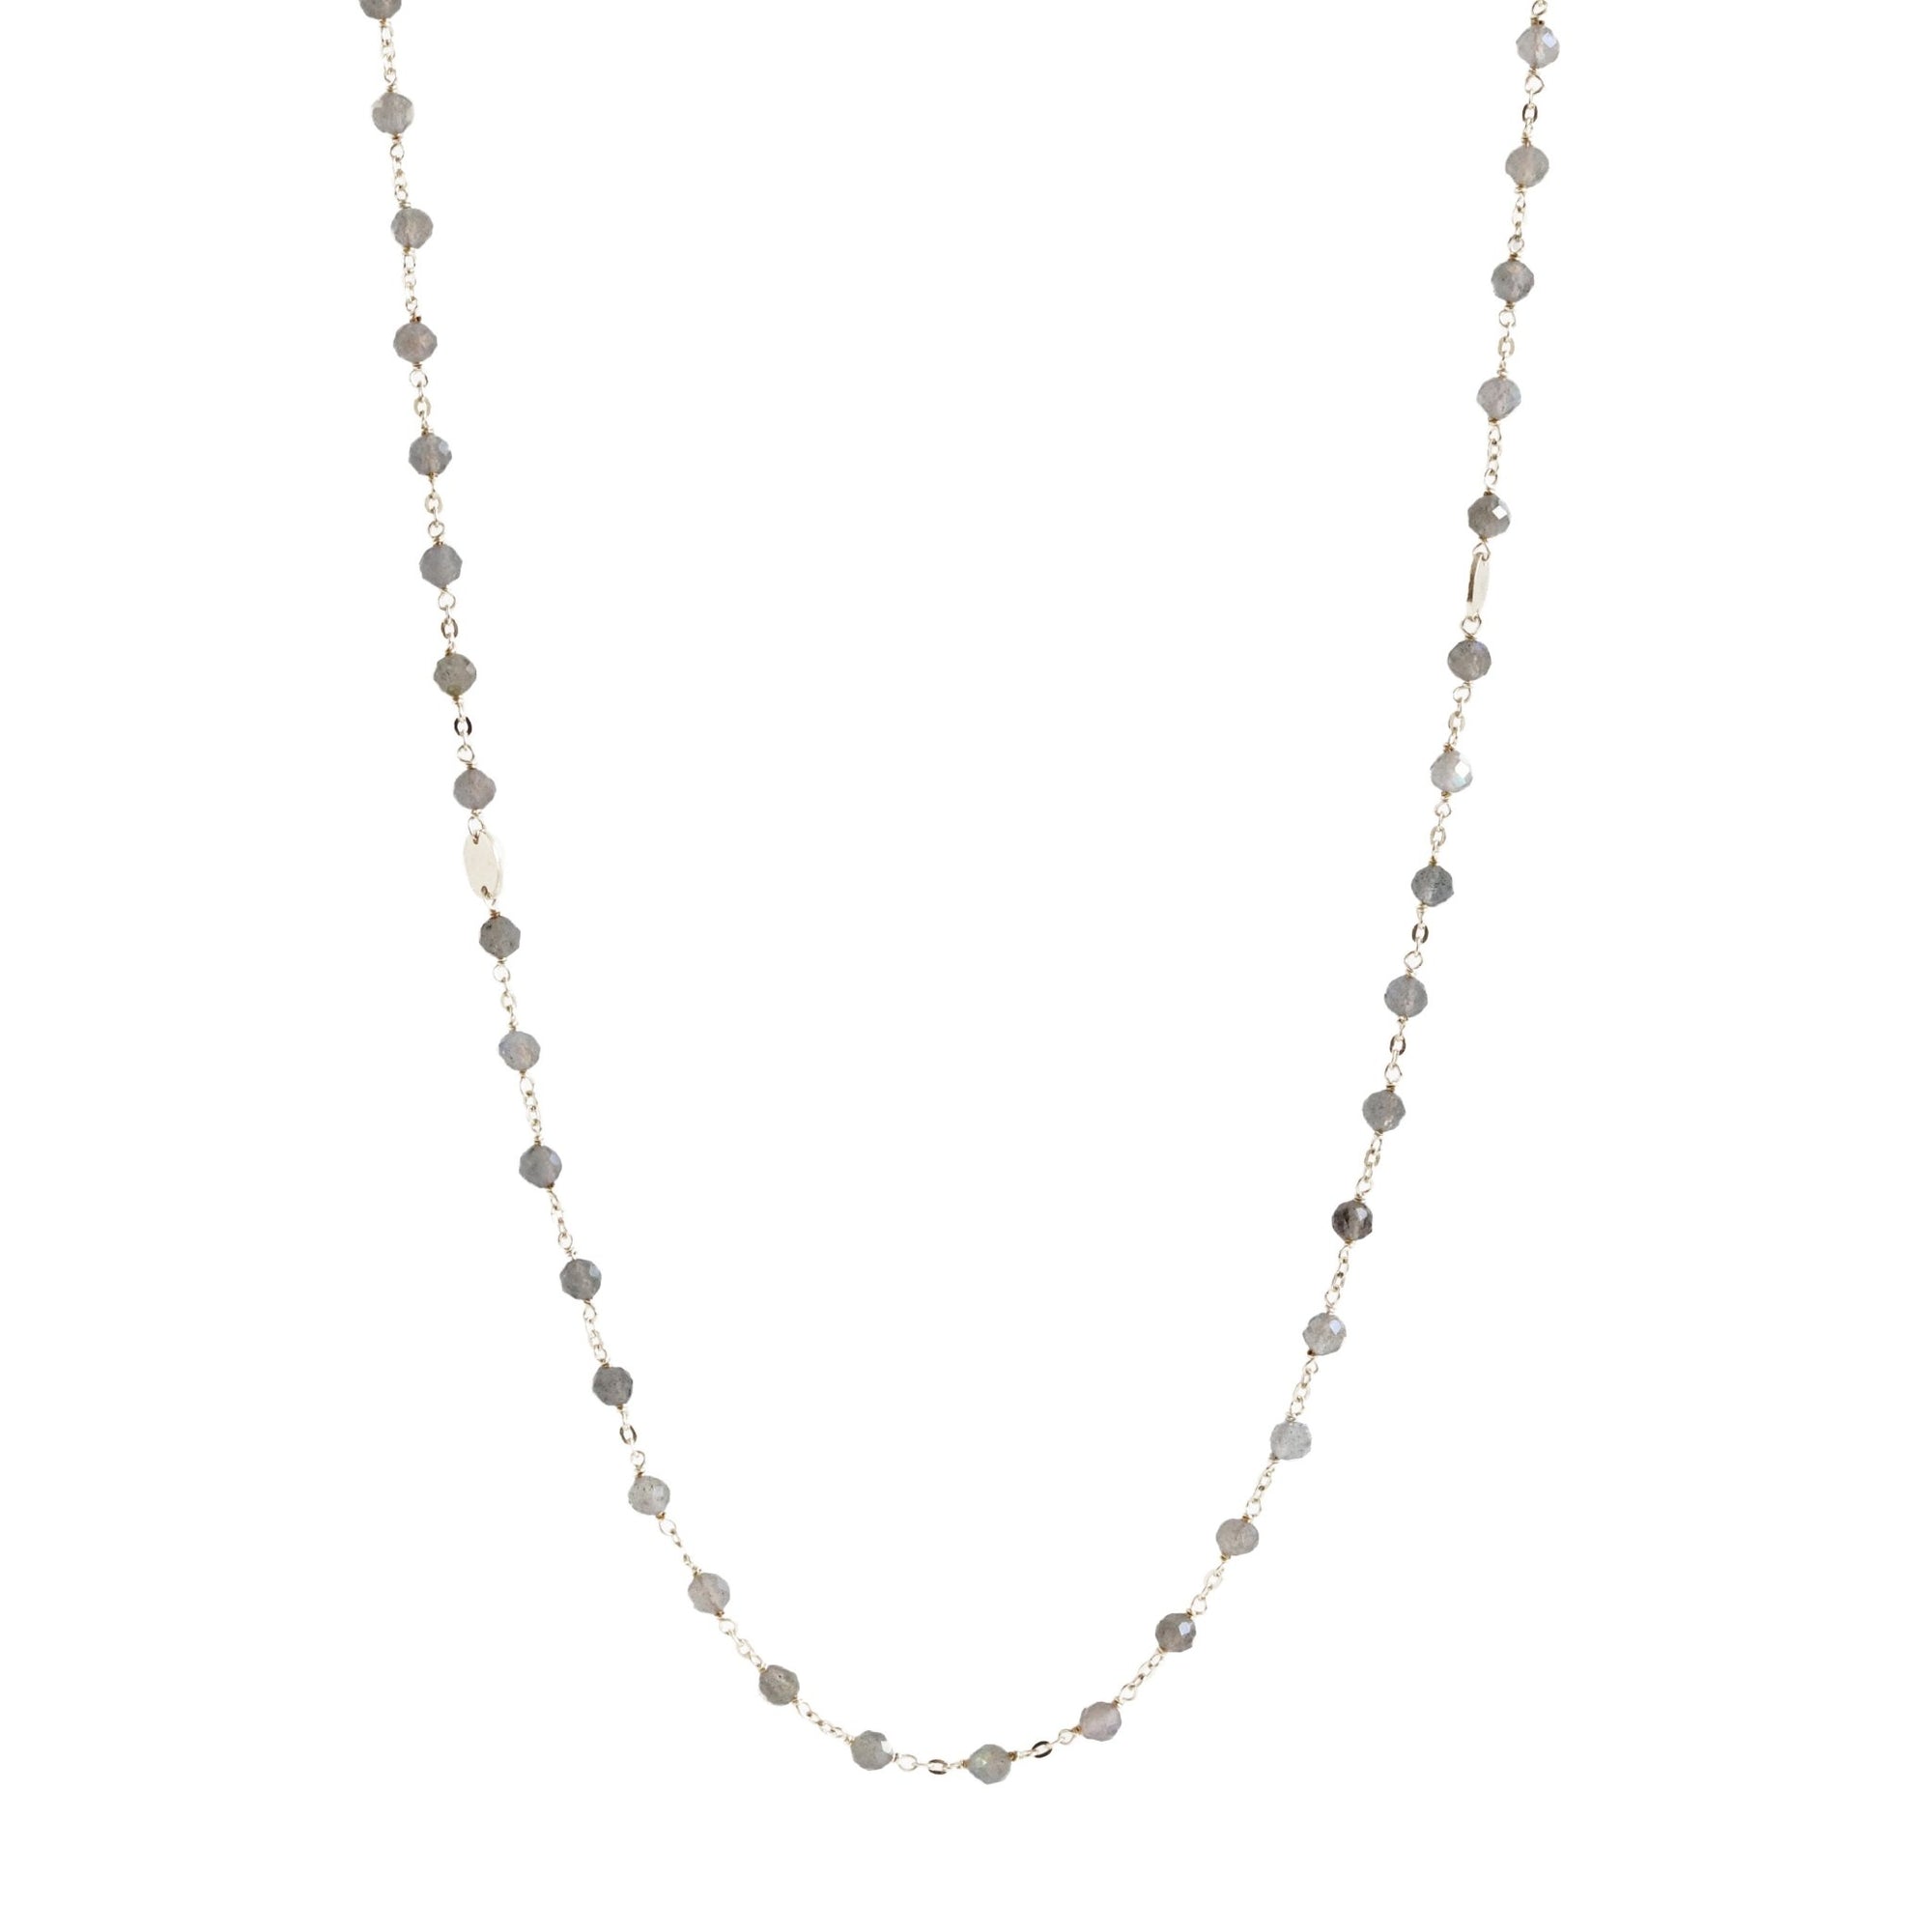 ICONIC LONG BEADED NECKLACE - LABRADORITE & SILVER 34" - SO PRETTY CARA COTTER